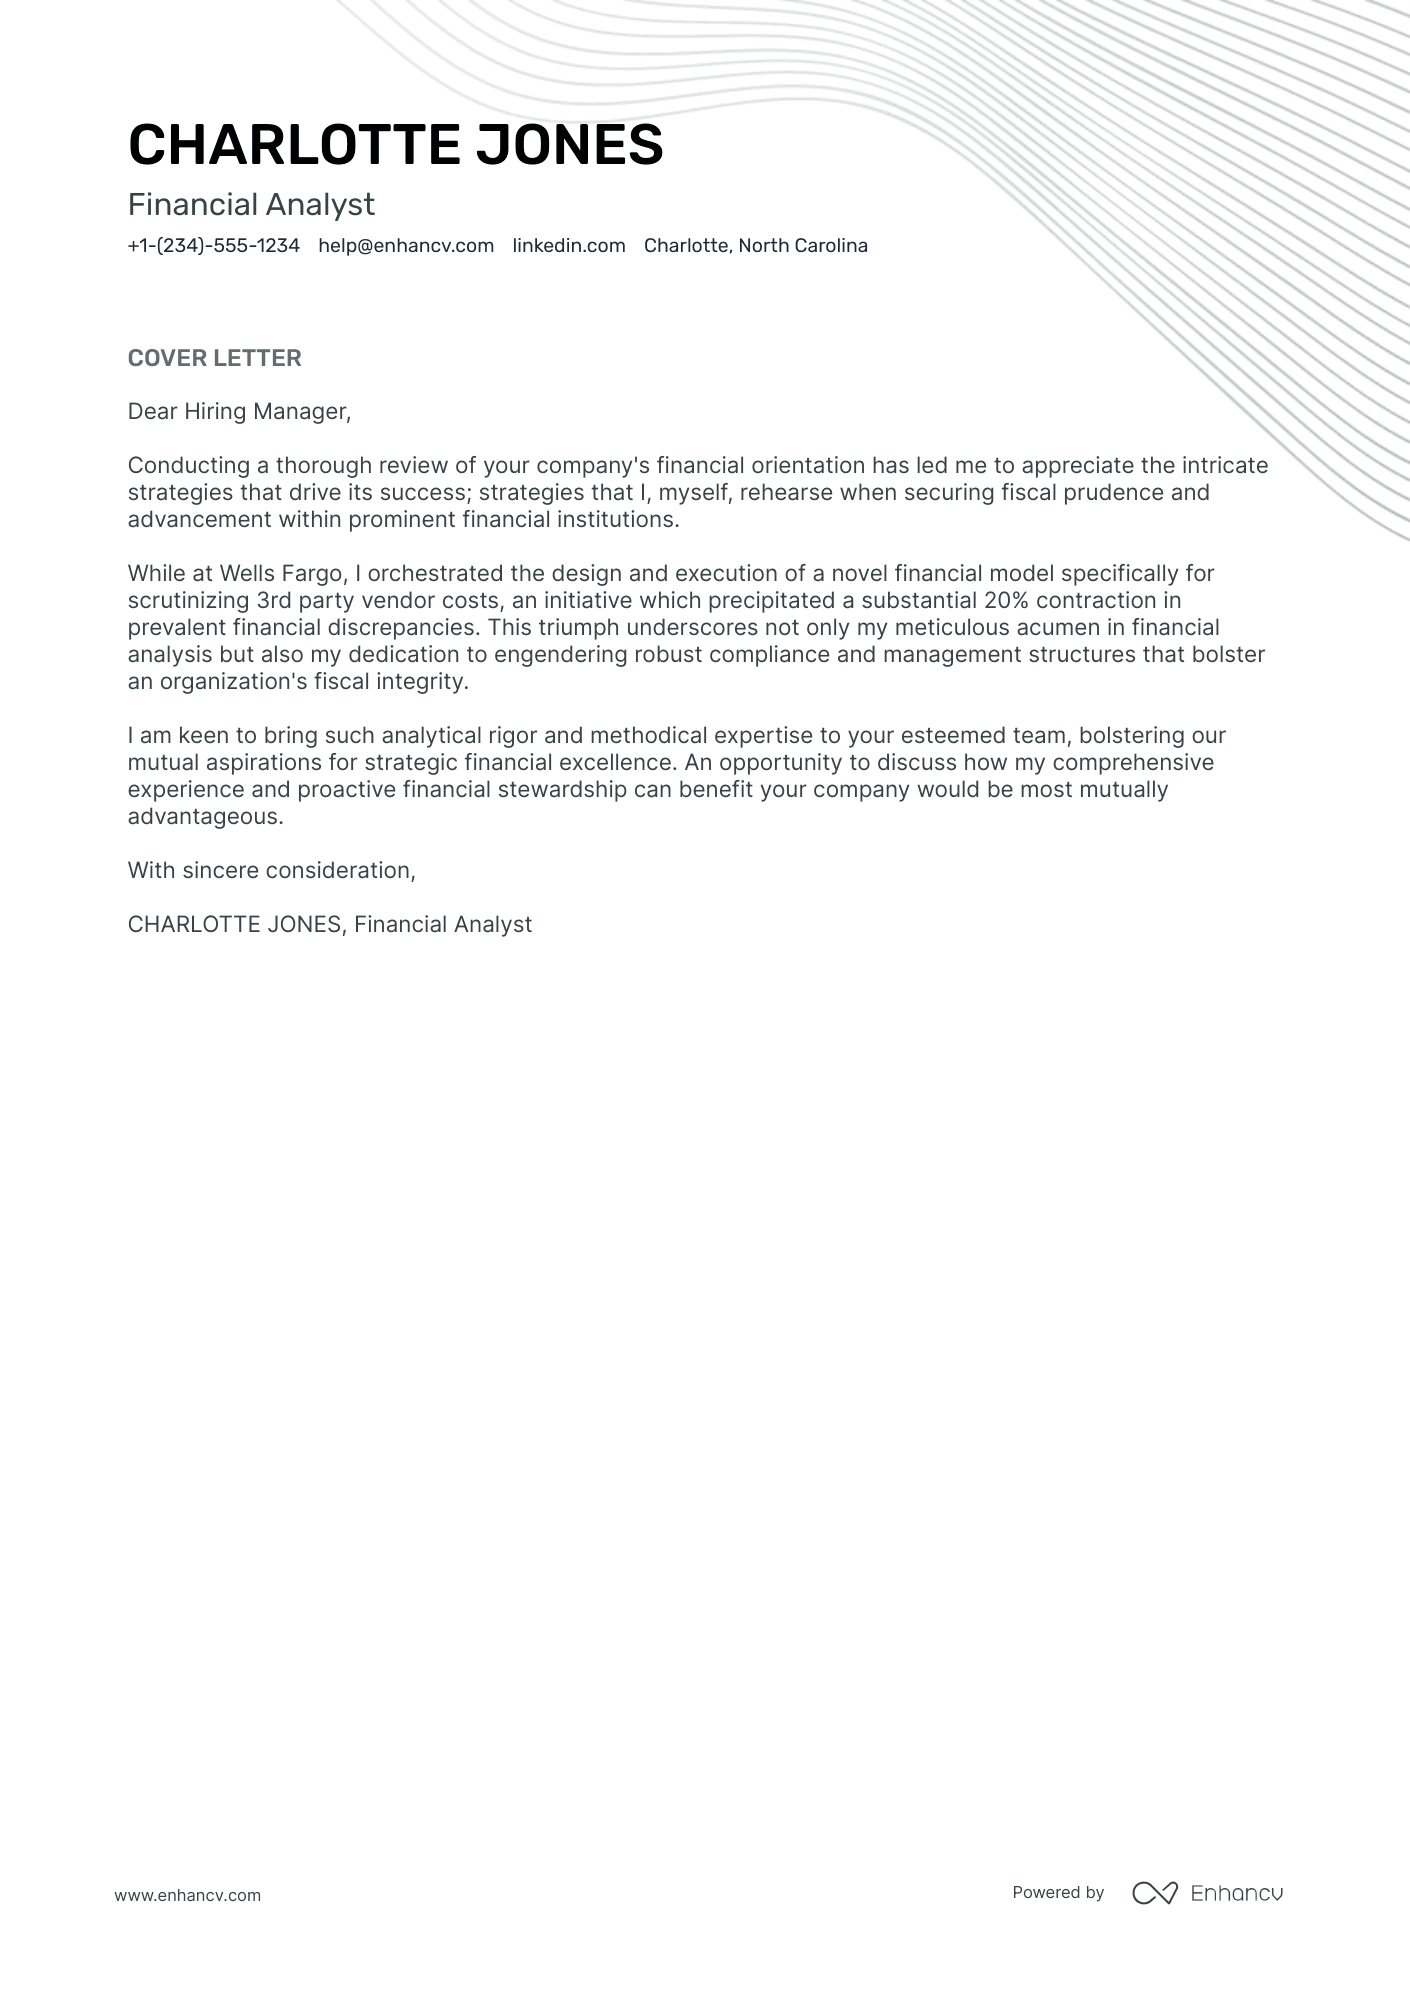 junior data analyst cover letter example